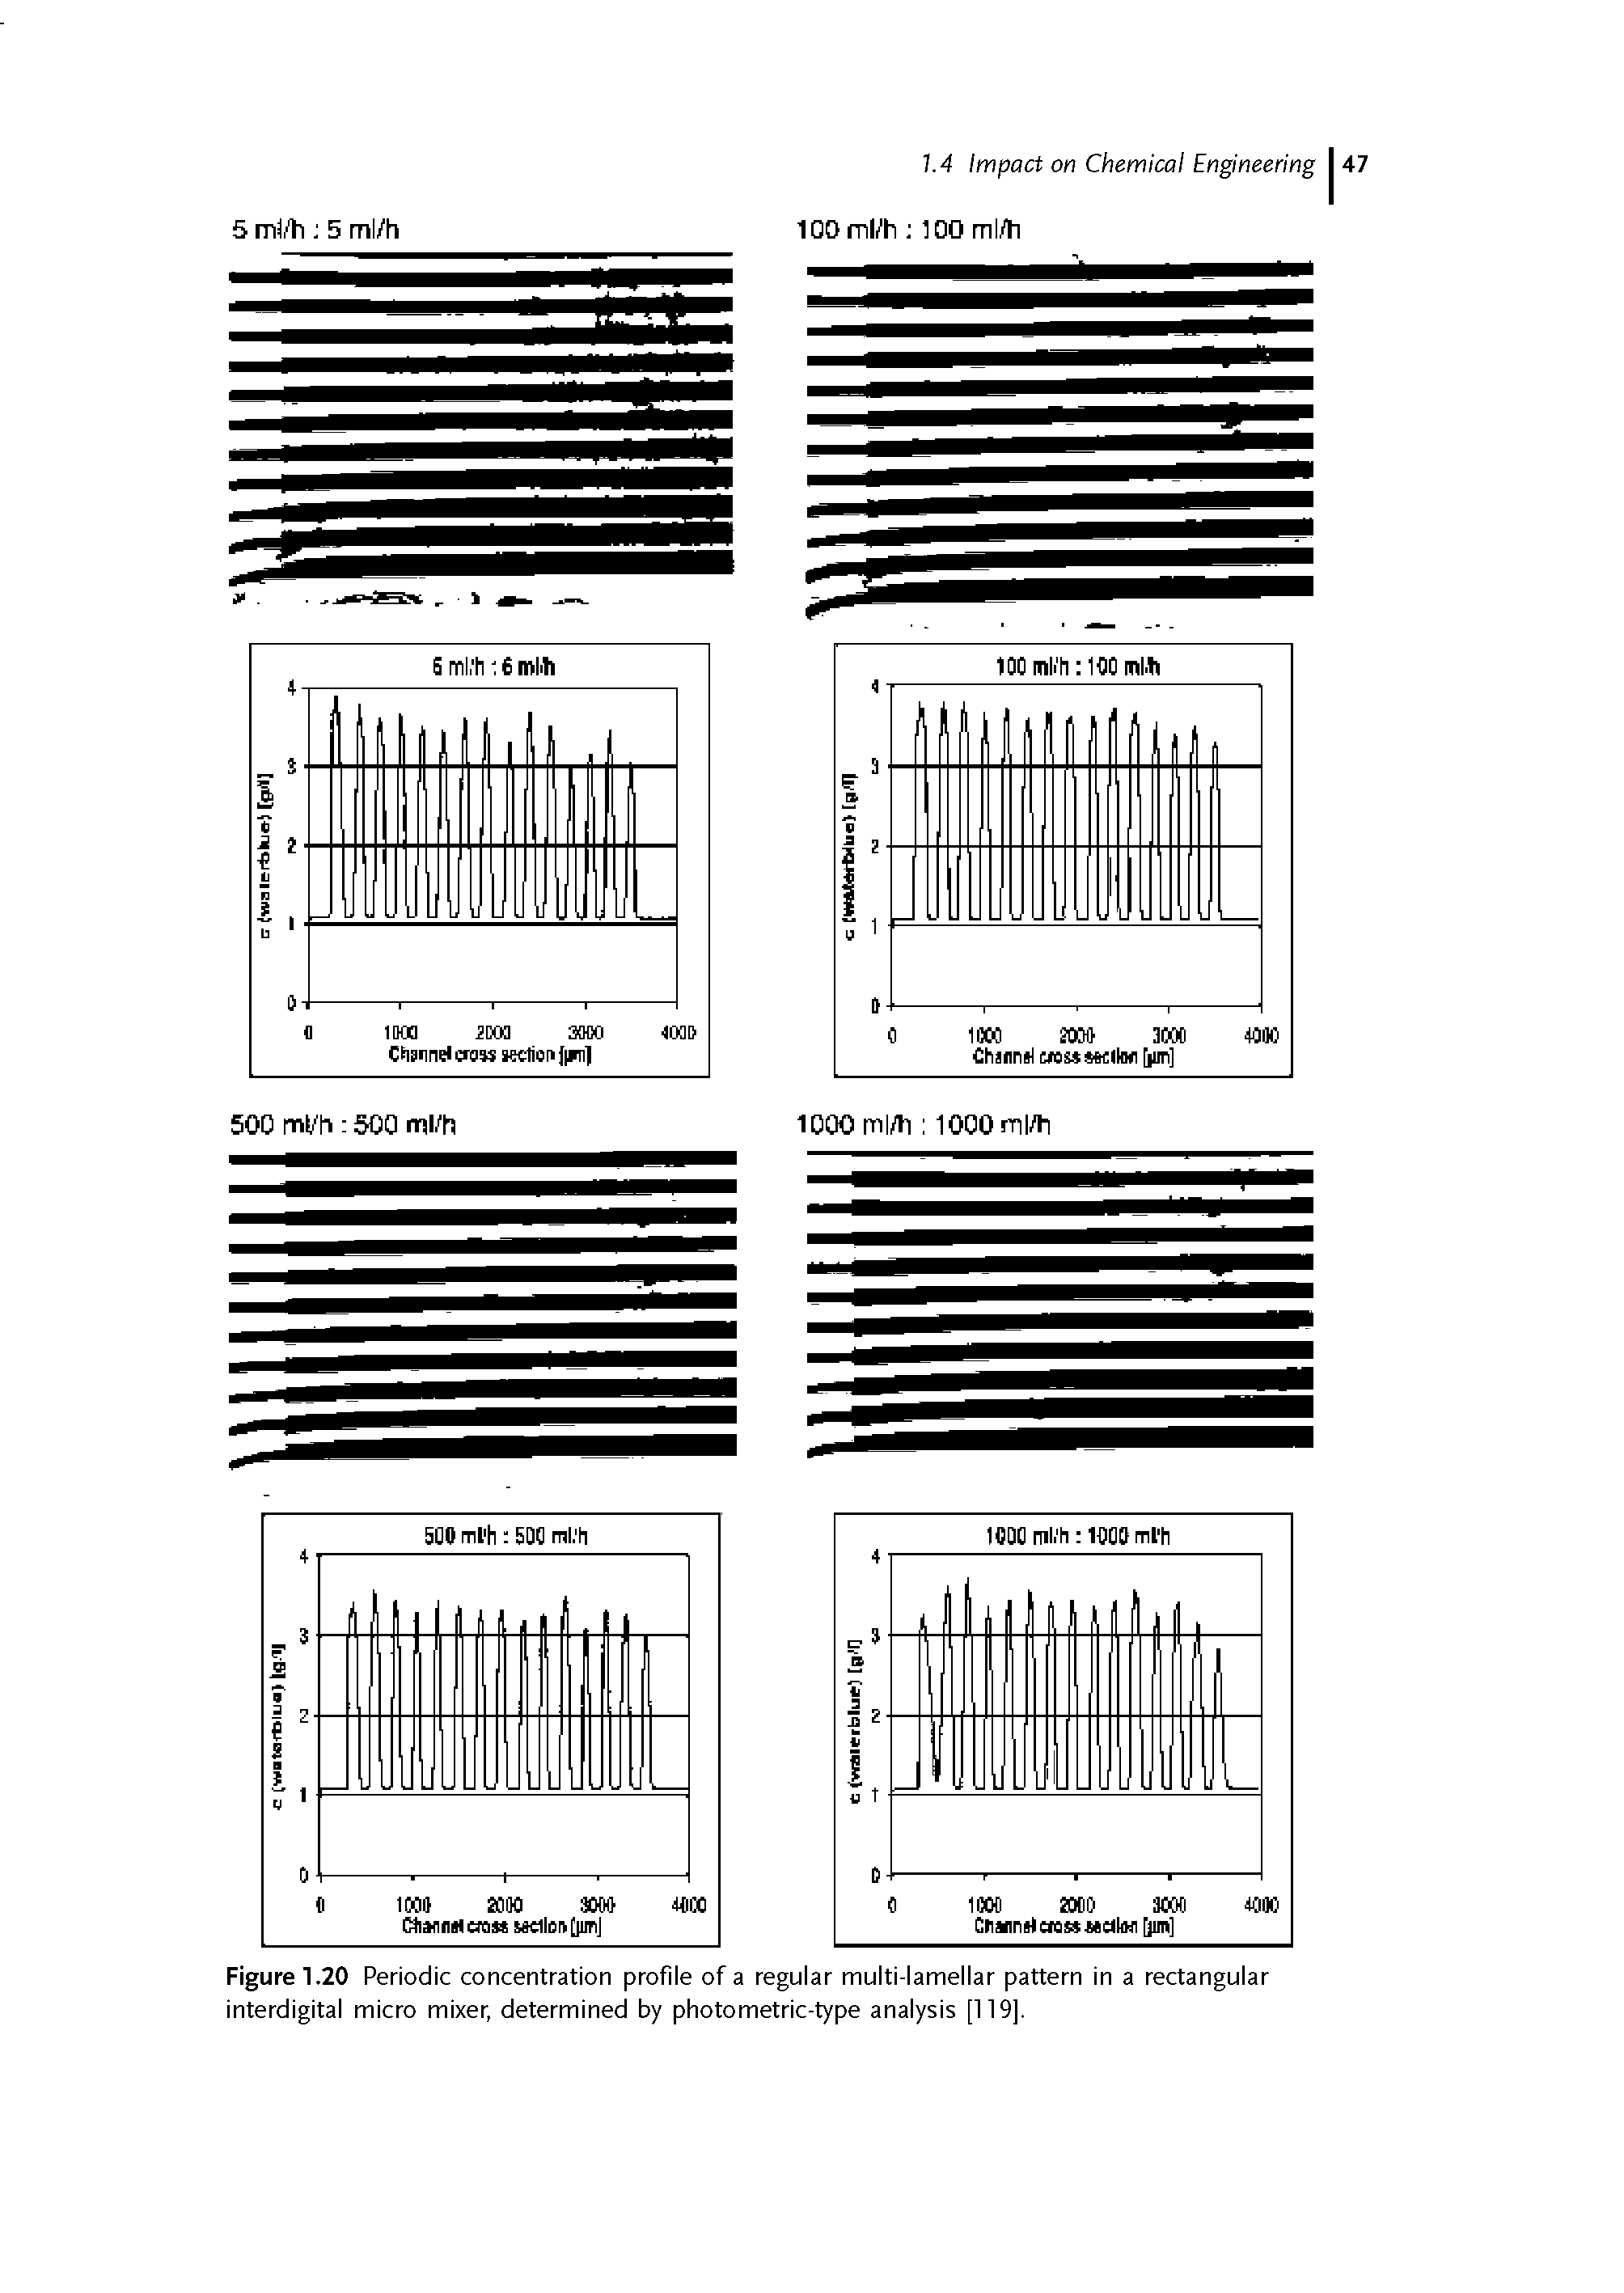 Figure 1.20 Periodic concentration profile of a regular multi-lamellar pattern in a rectangular interdigital micro mixer, determined by photometric-type analysis [119].